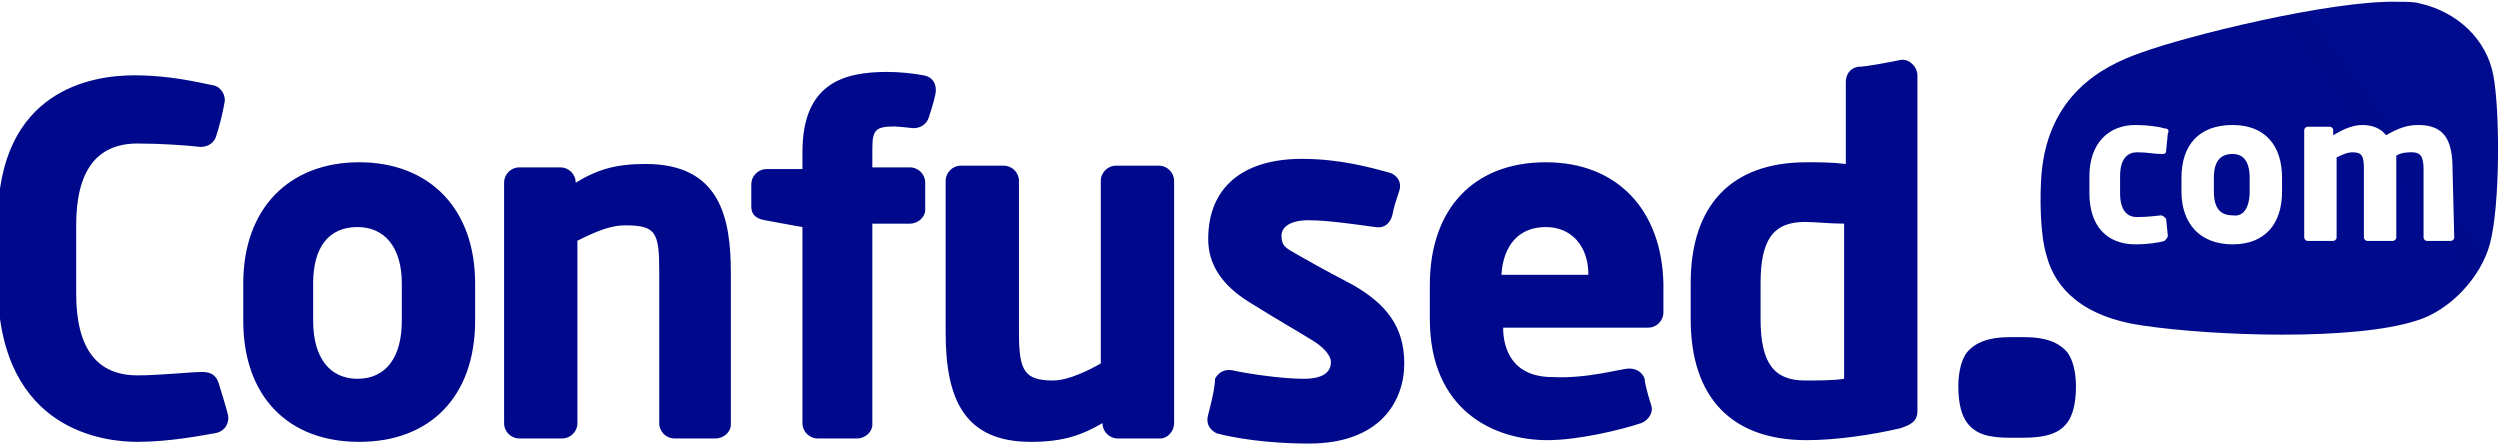 Confused logo